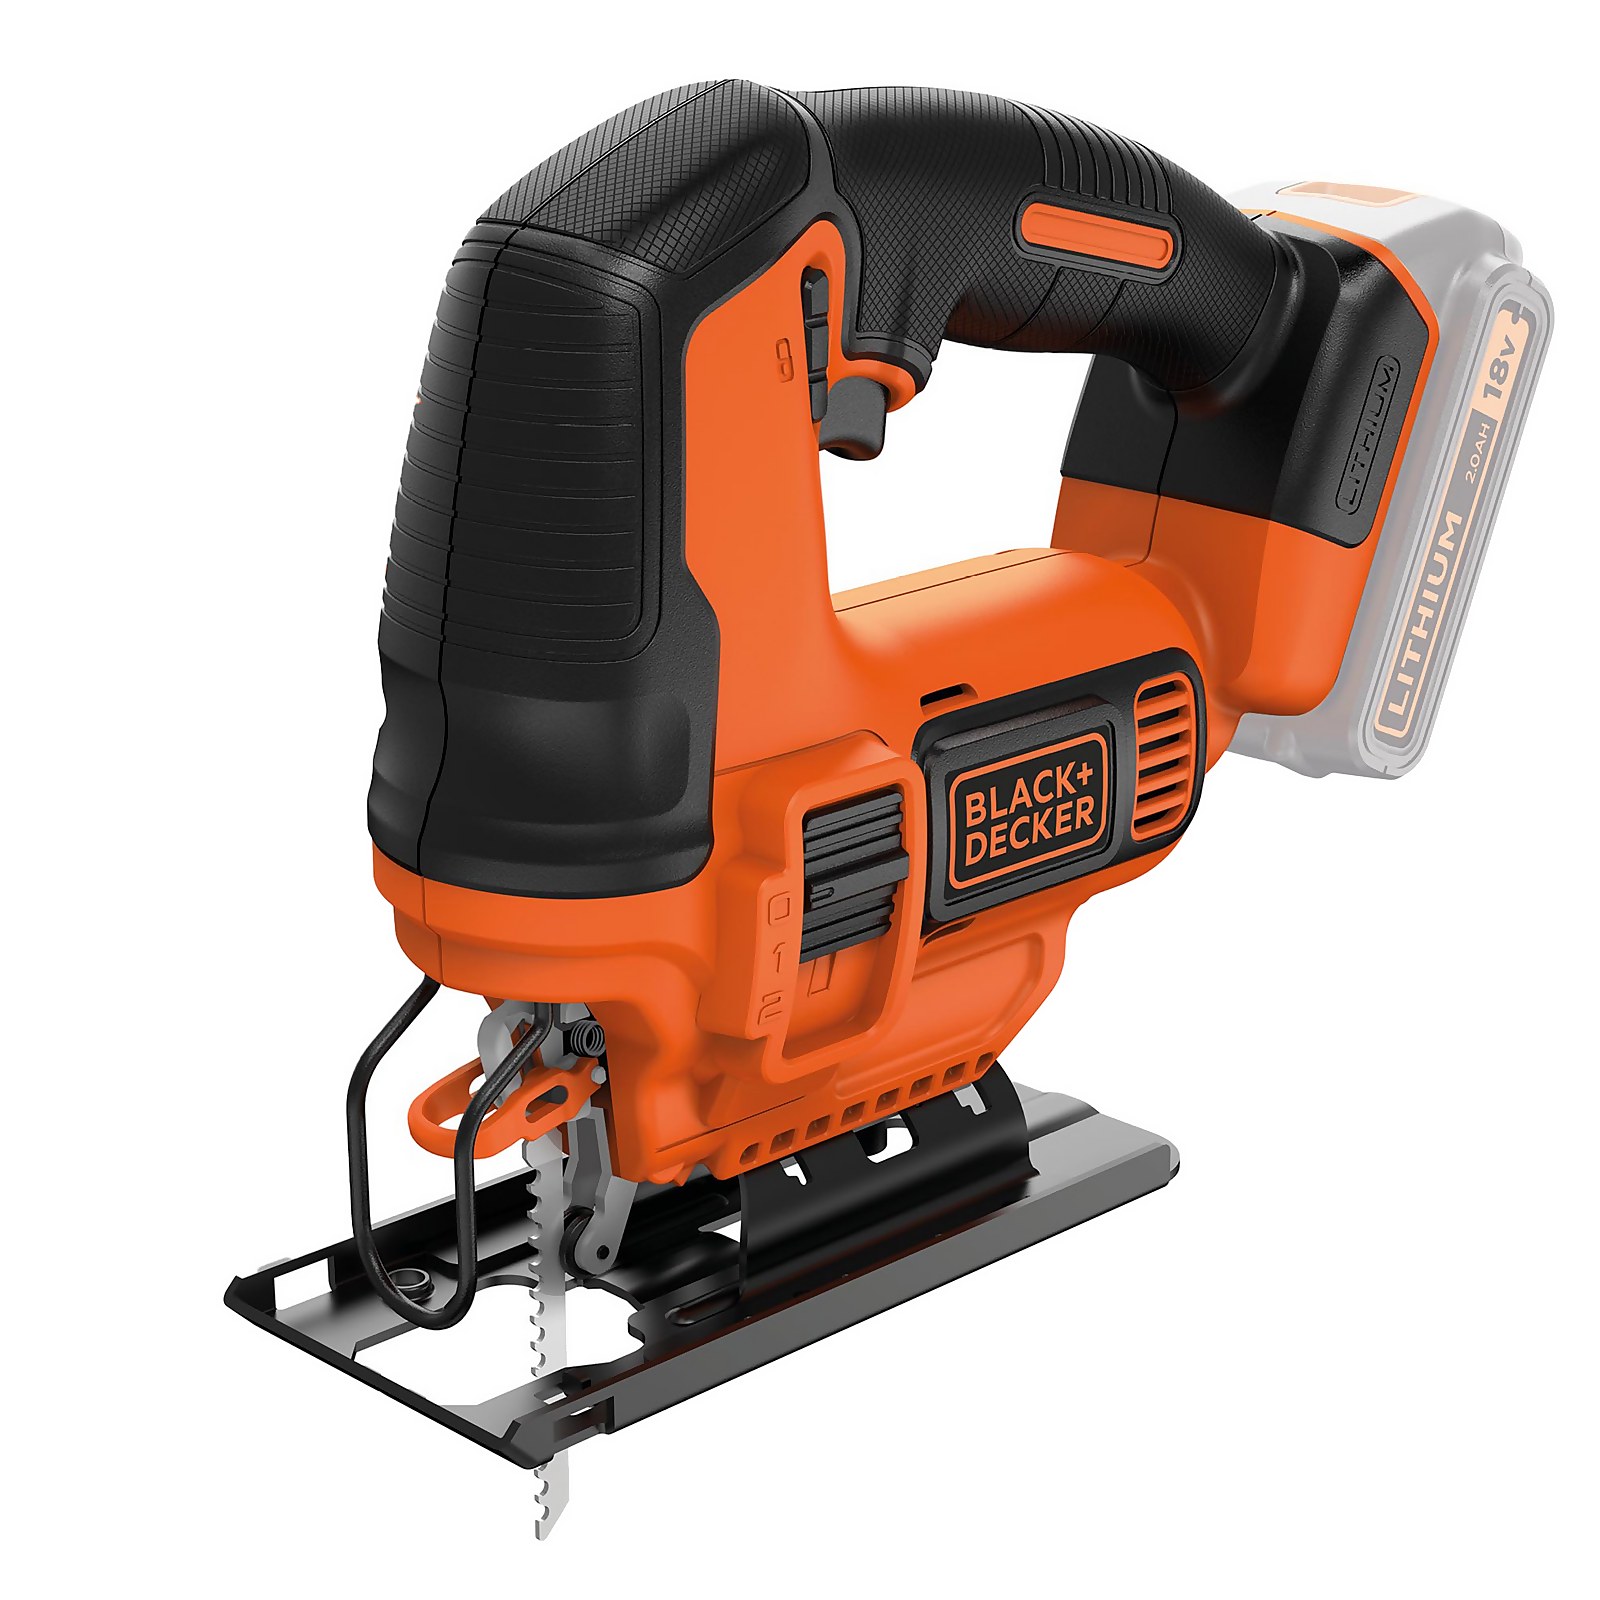 Photo of Black+decker 18v Cordless Jigsaw With Blade – -battery Not Included- -bdcjs18n-xj-